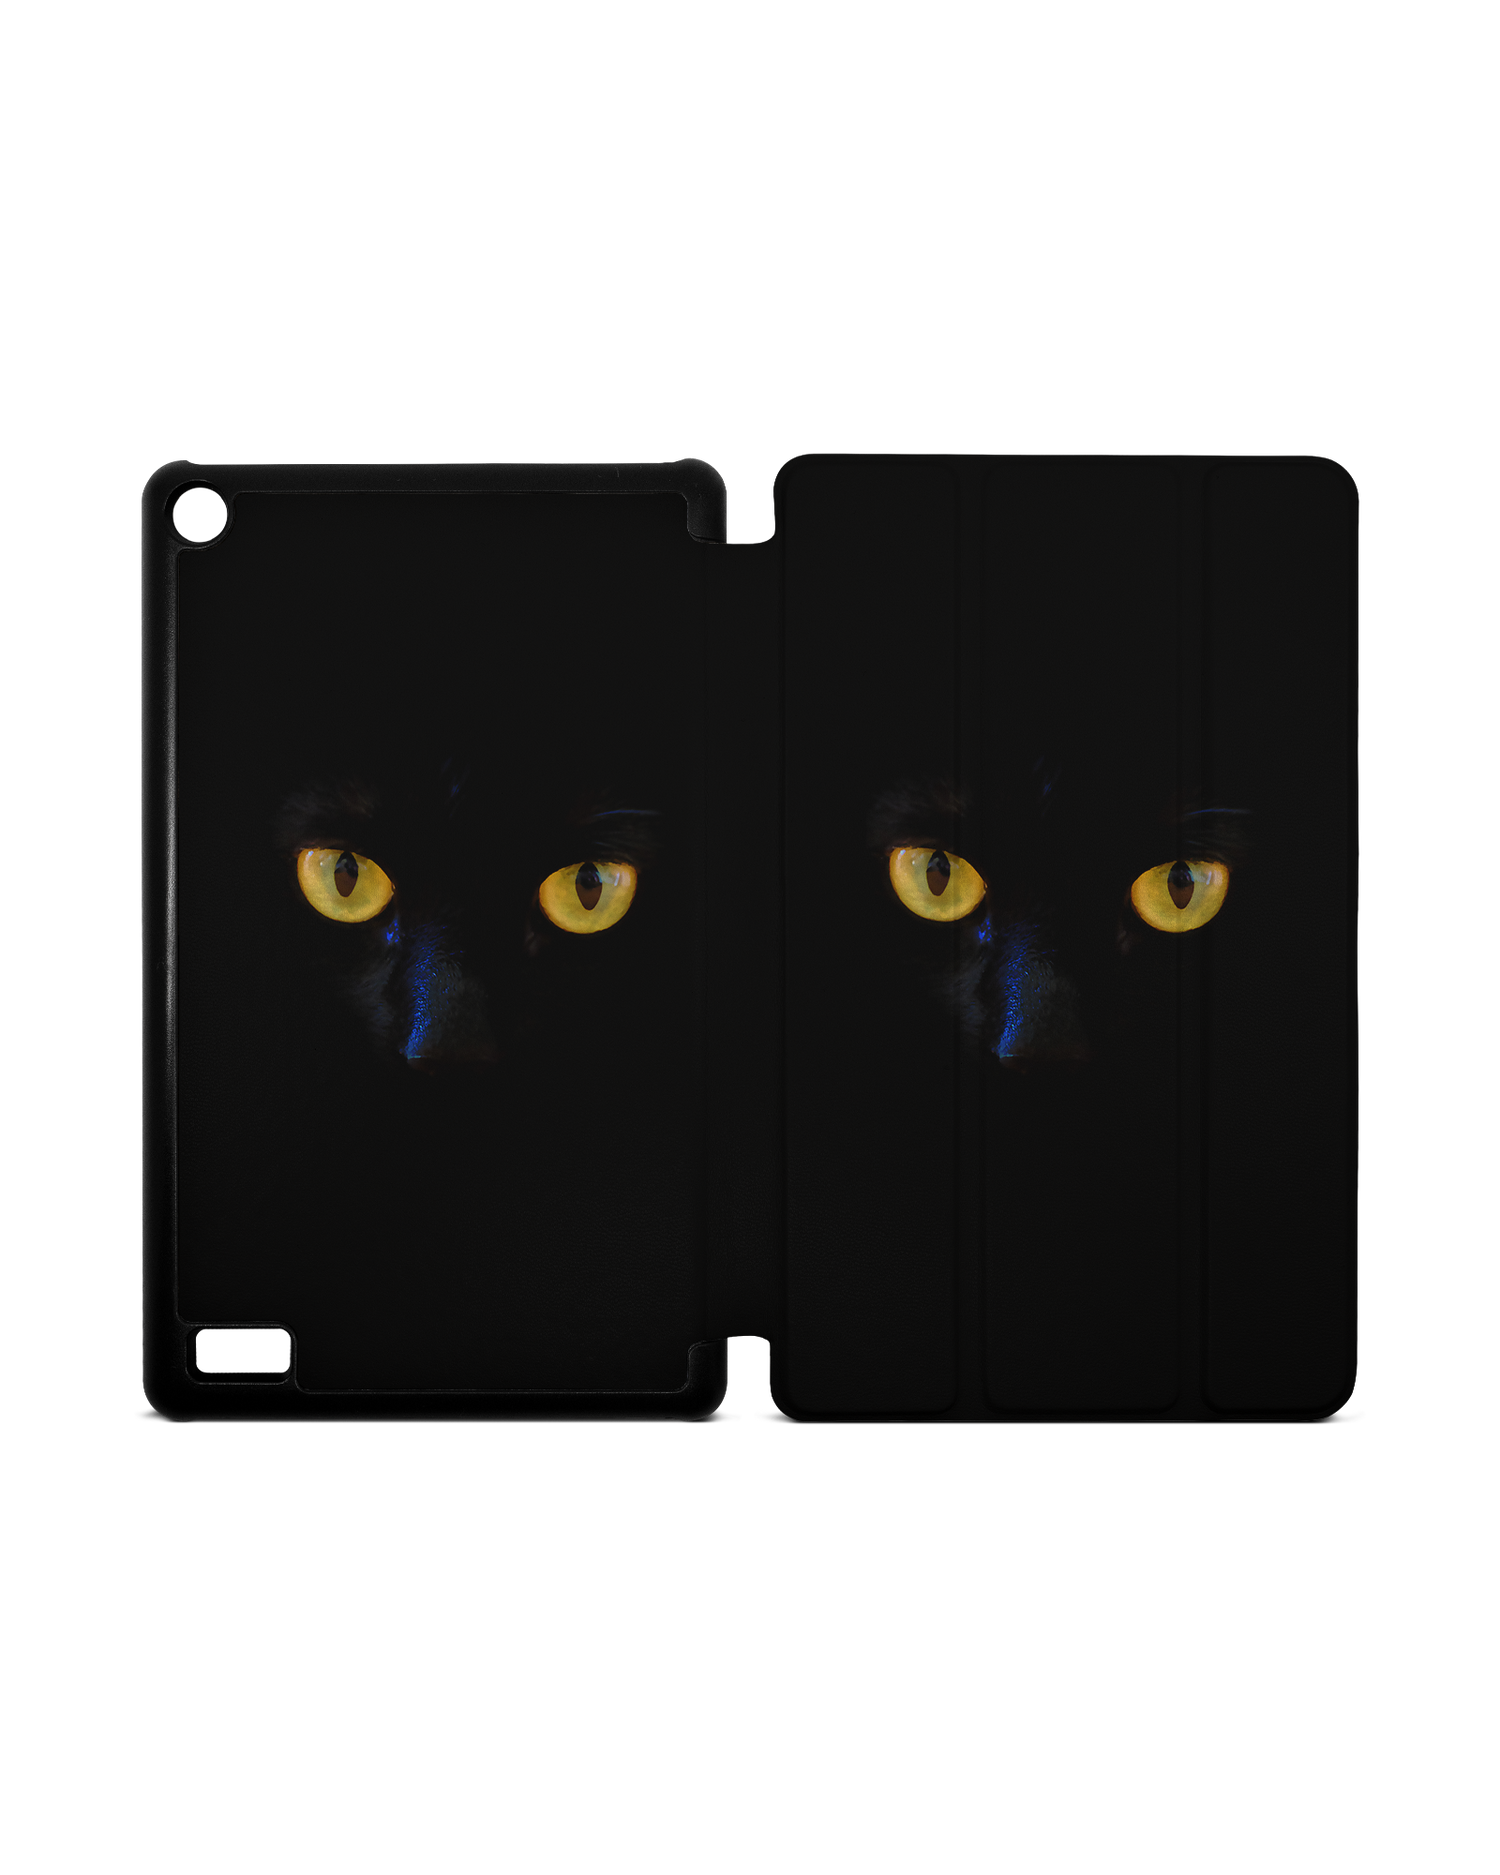 Black Cat Tablet Smart Case for Amazon Fire 7: Opened